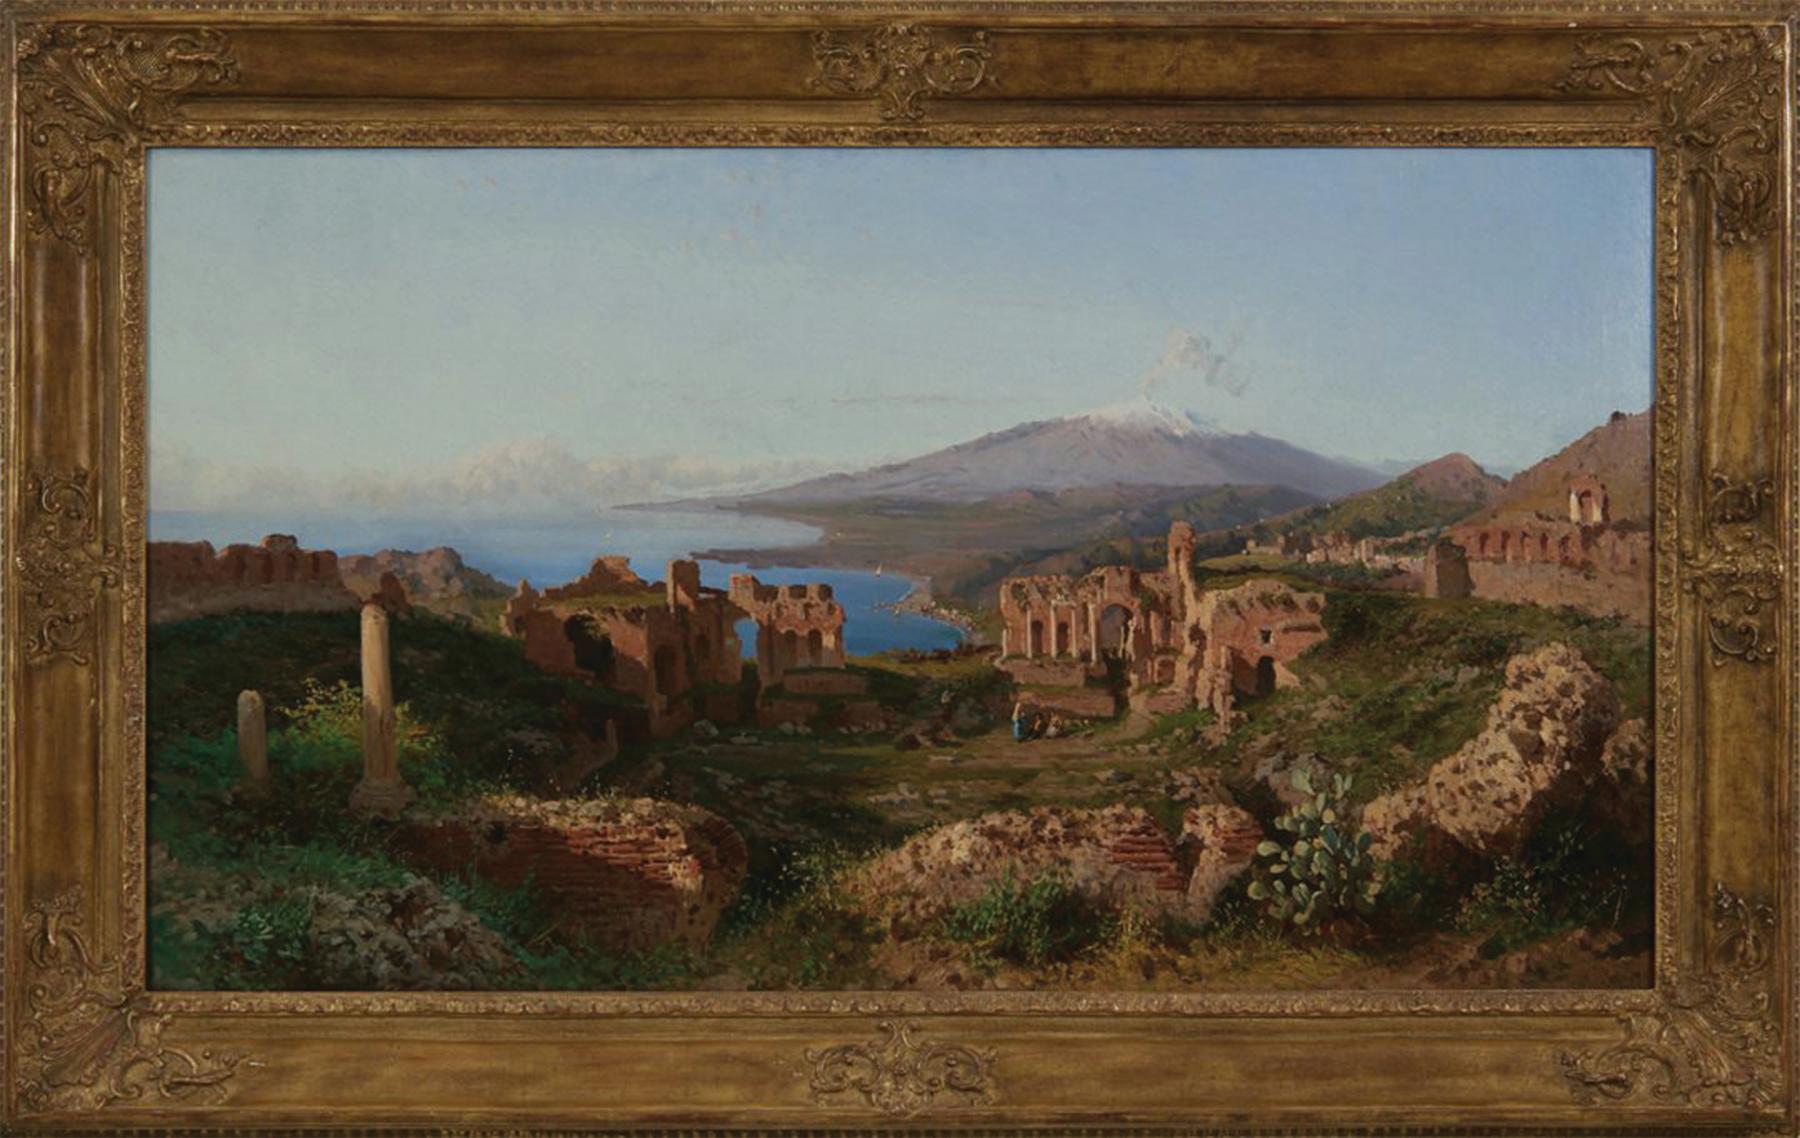 View of Mt. Etna From the Ruins of the Theatre at Taormina, 19th Century Italian - Painting by Alessandro La Volpe